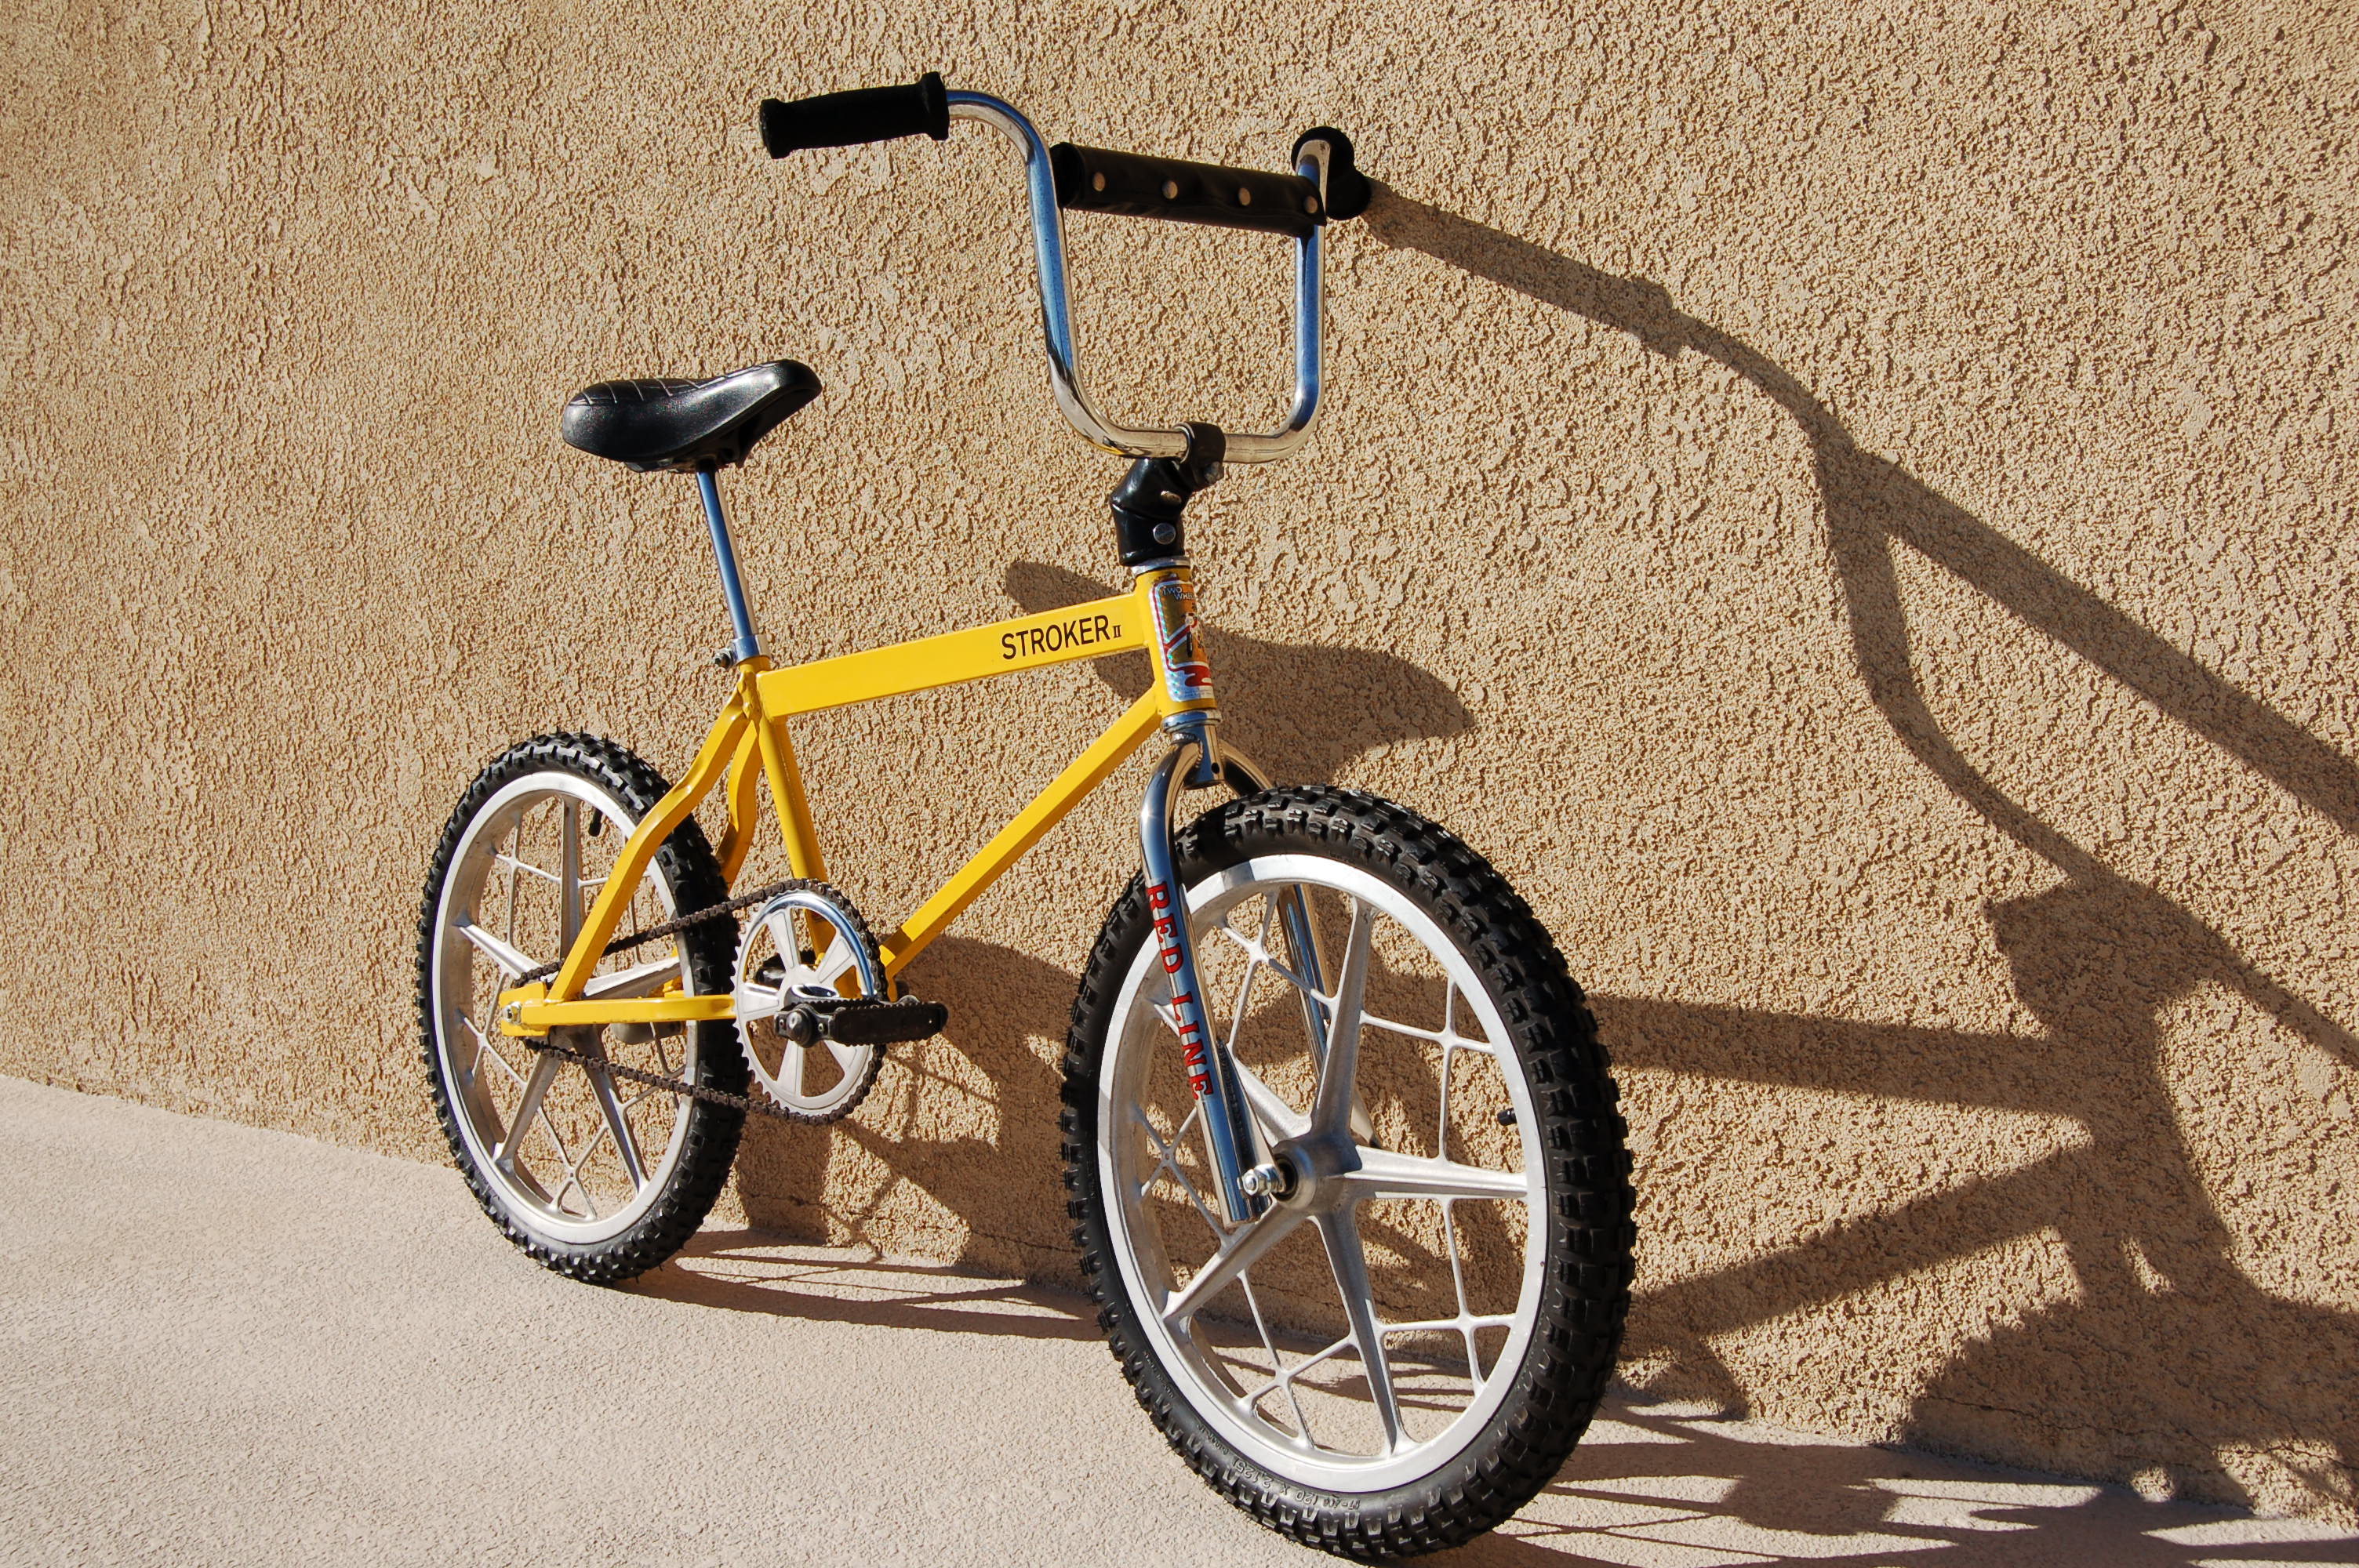 70's bikes Riding, Research & Collecting BMX Society community forums